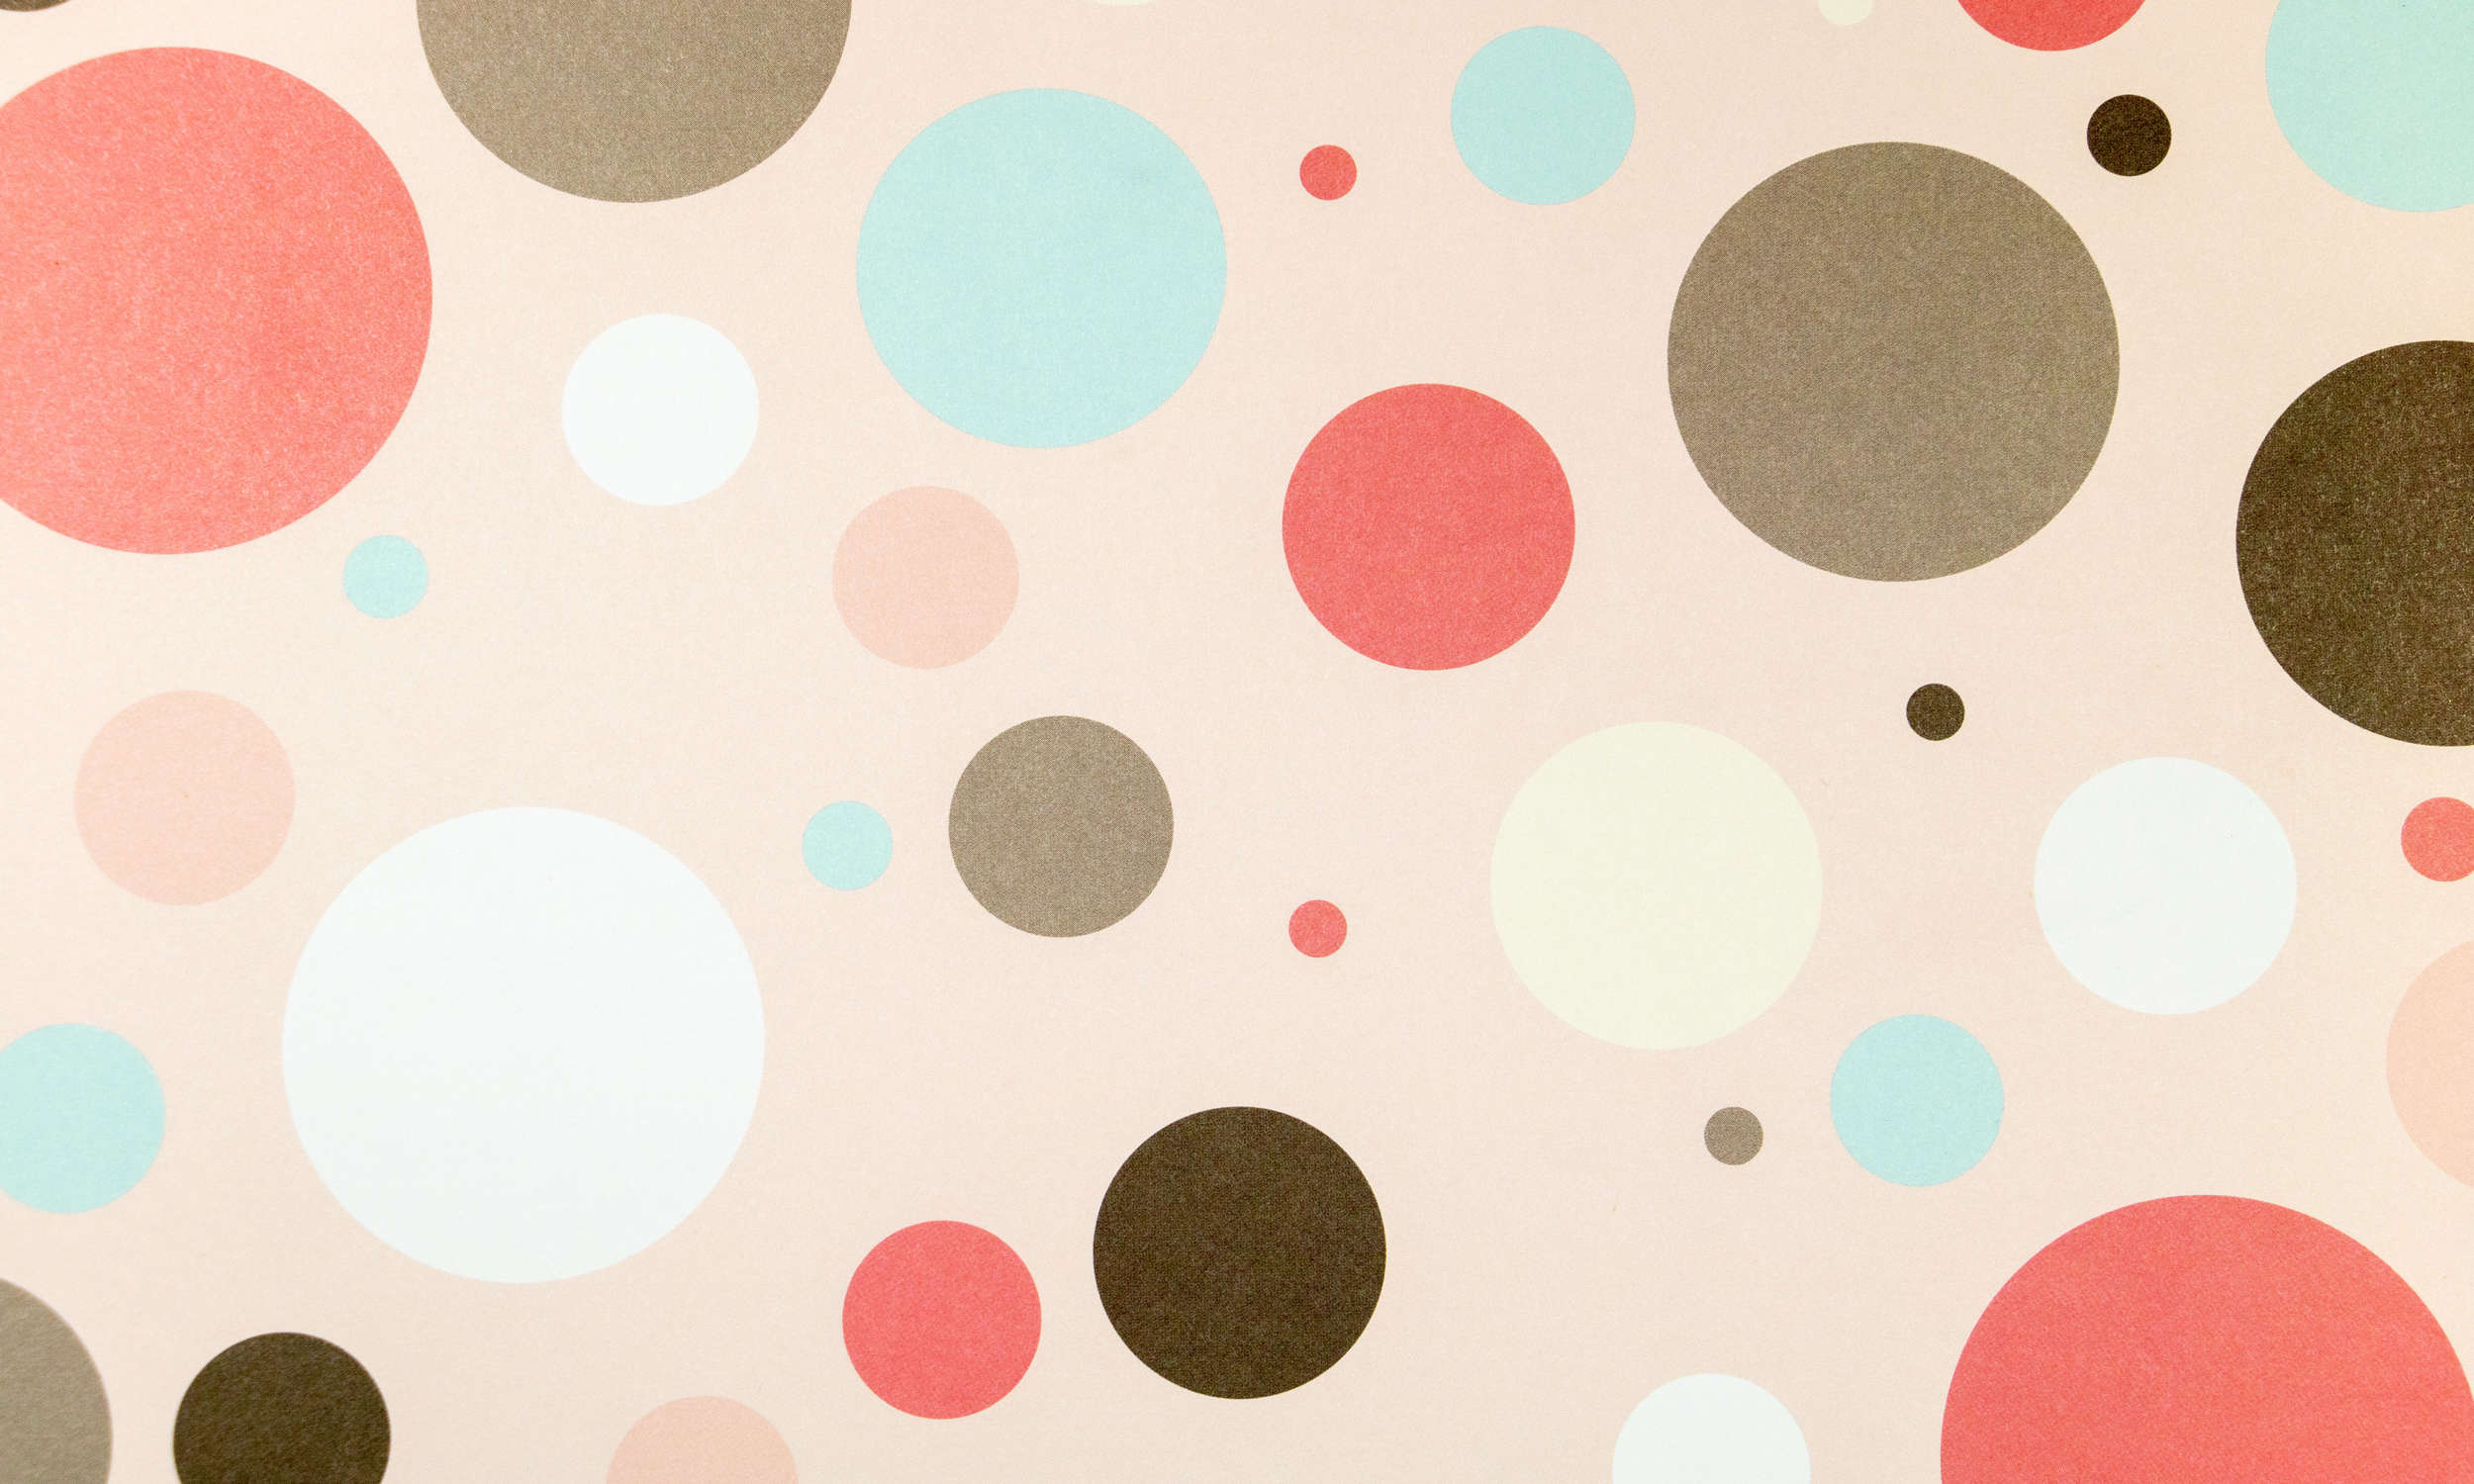             Nursery mural with colourful circles - Smooth & pearlescent fleece
        